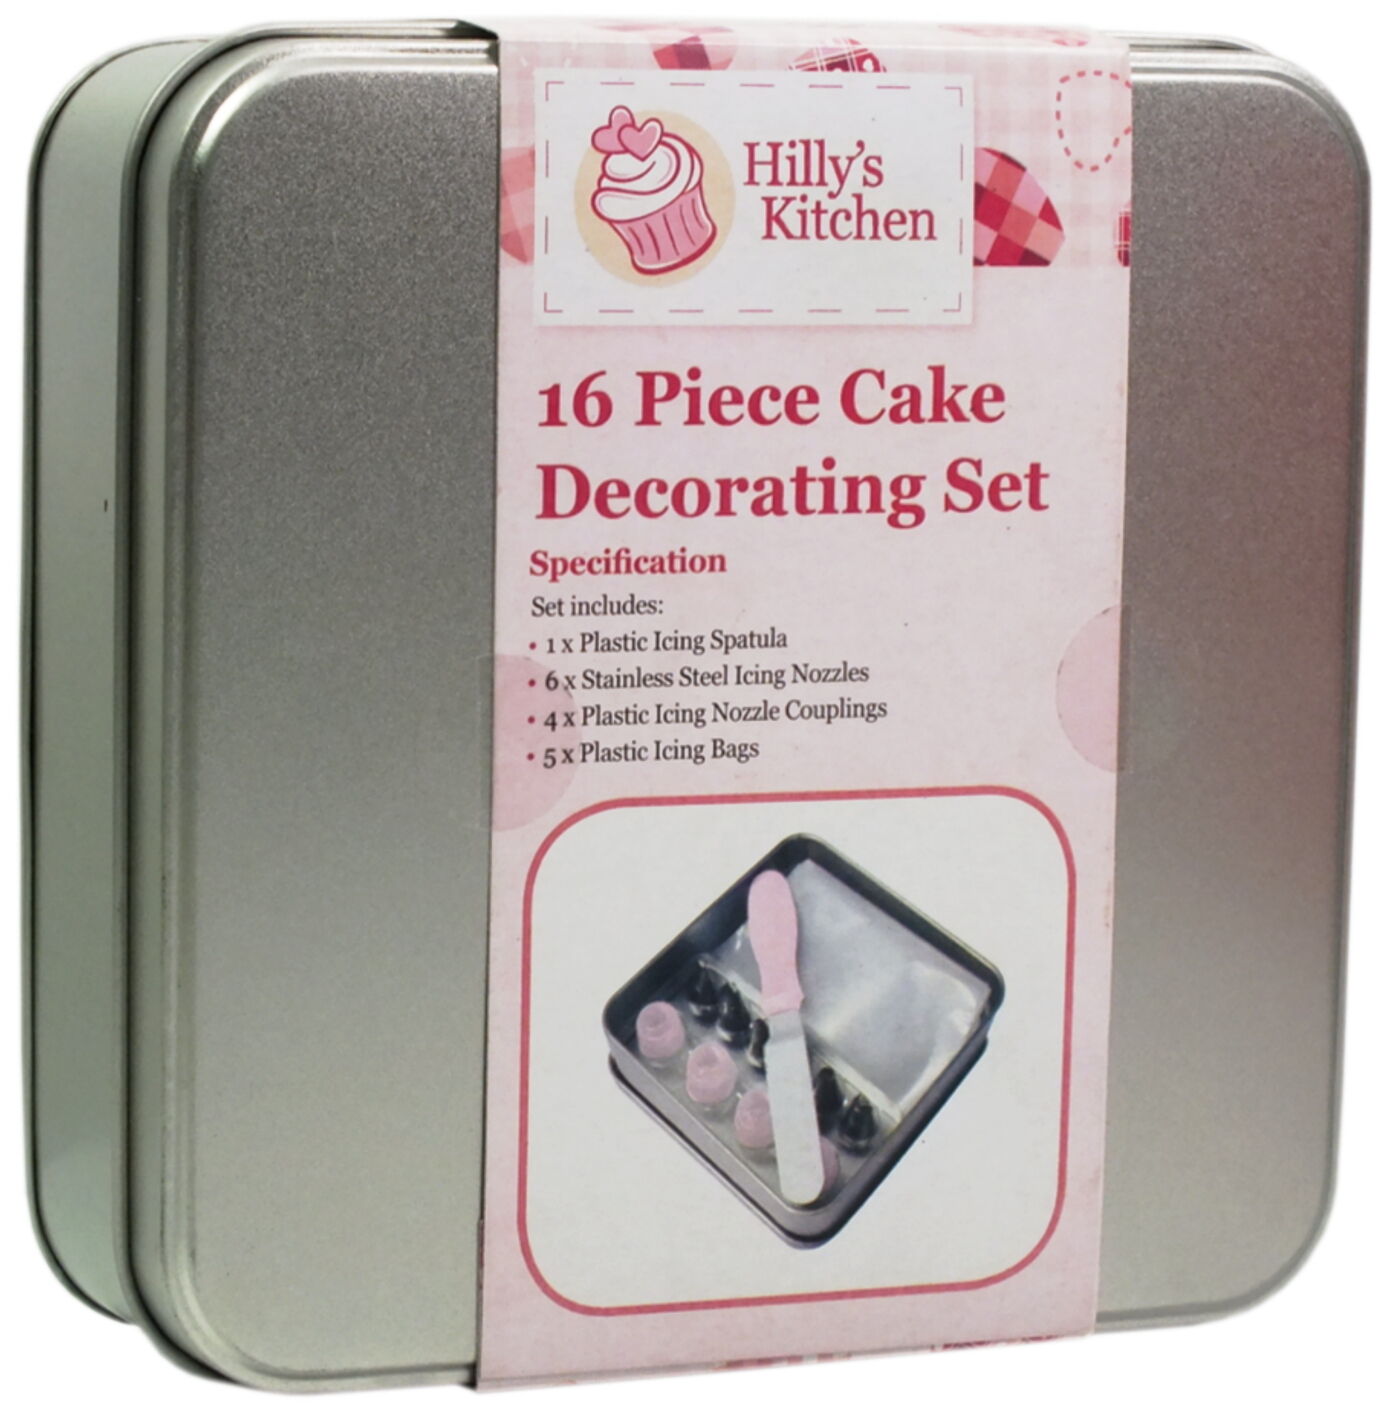 Hilly's Kitchen Cake Decoration Set 16 Pieces Icing Spatula Icing Nozzles Bags